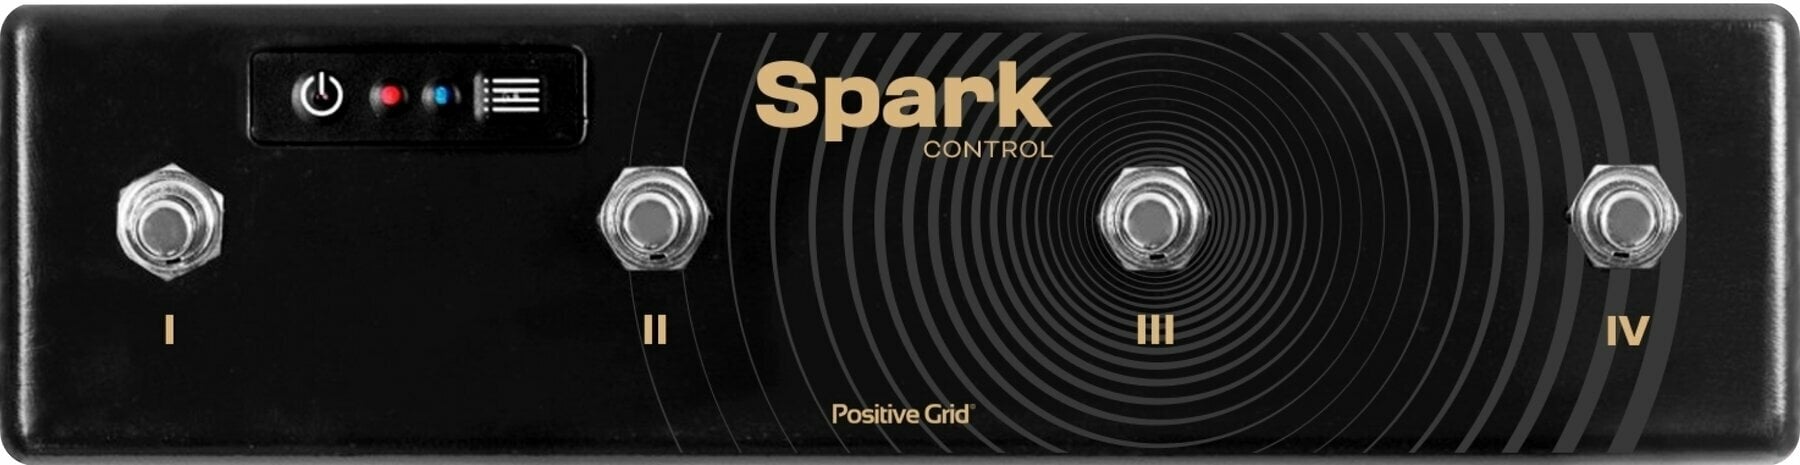 Footswitch Positive Grid Spark Control Footswitch